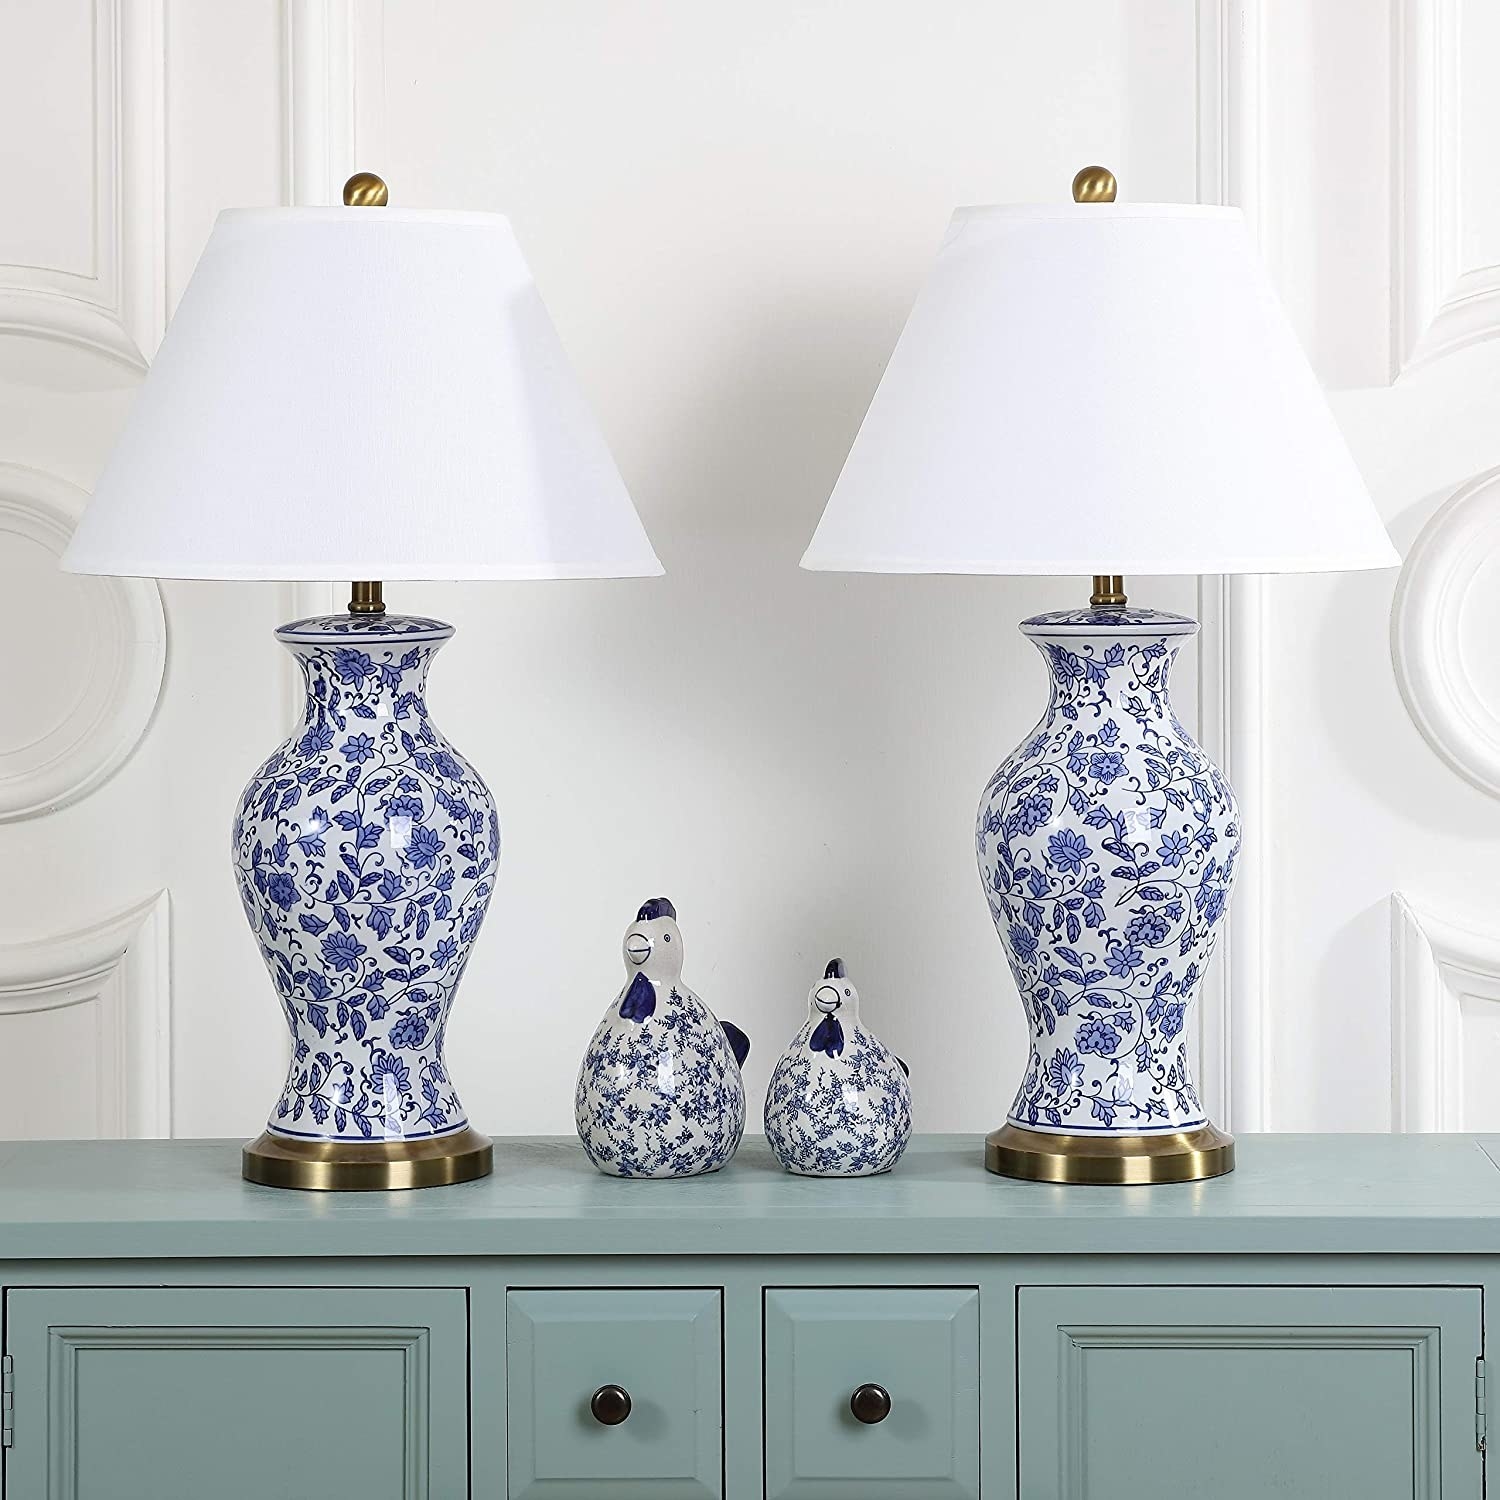 the blue and white floral lamps with white lampshades